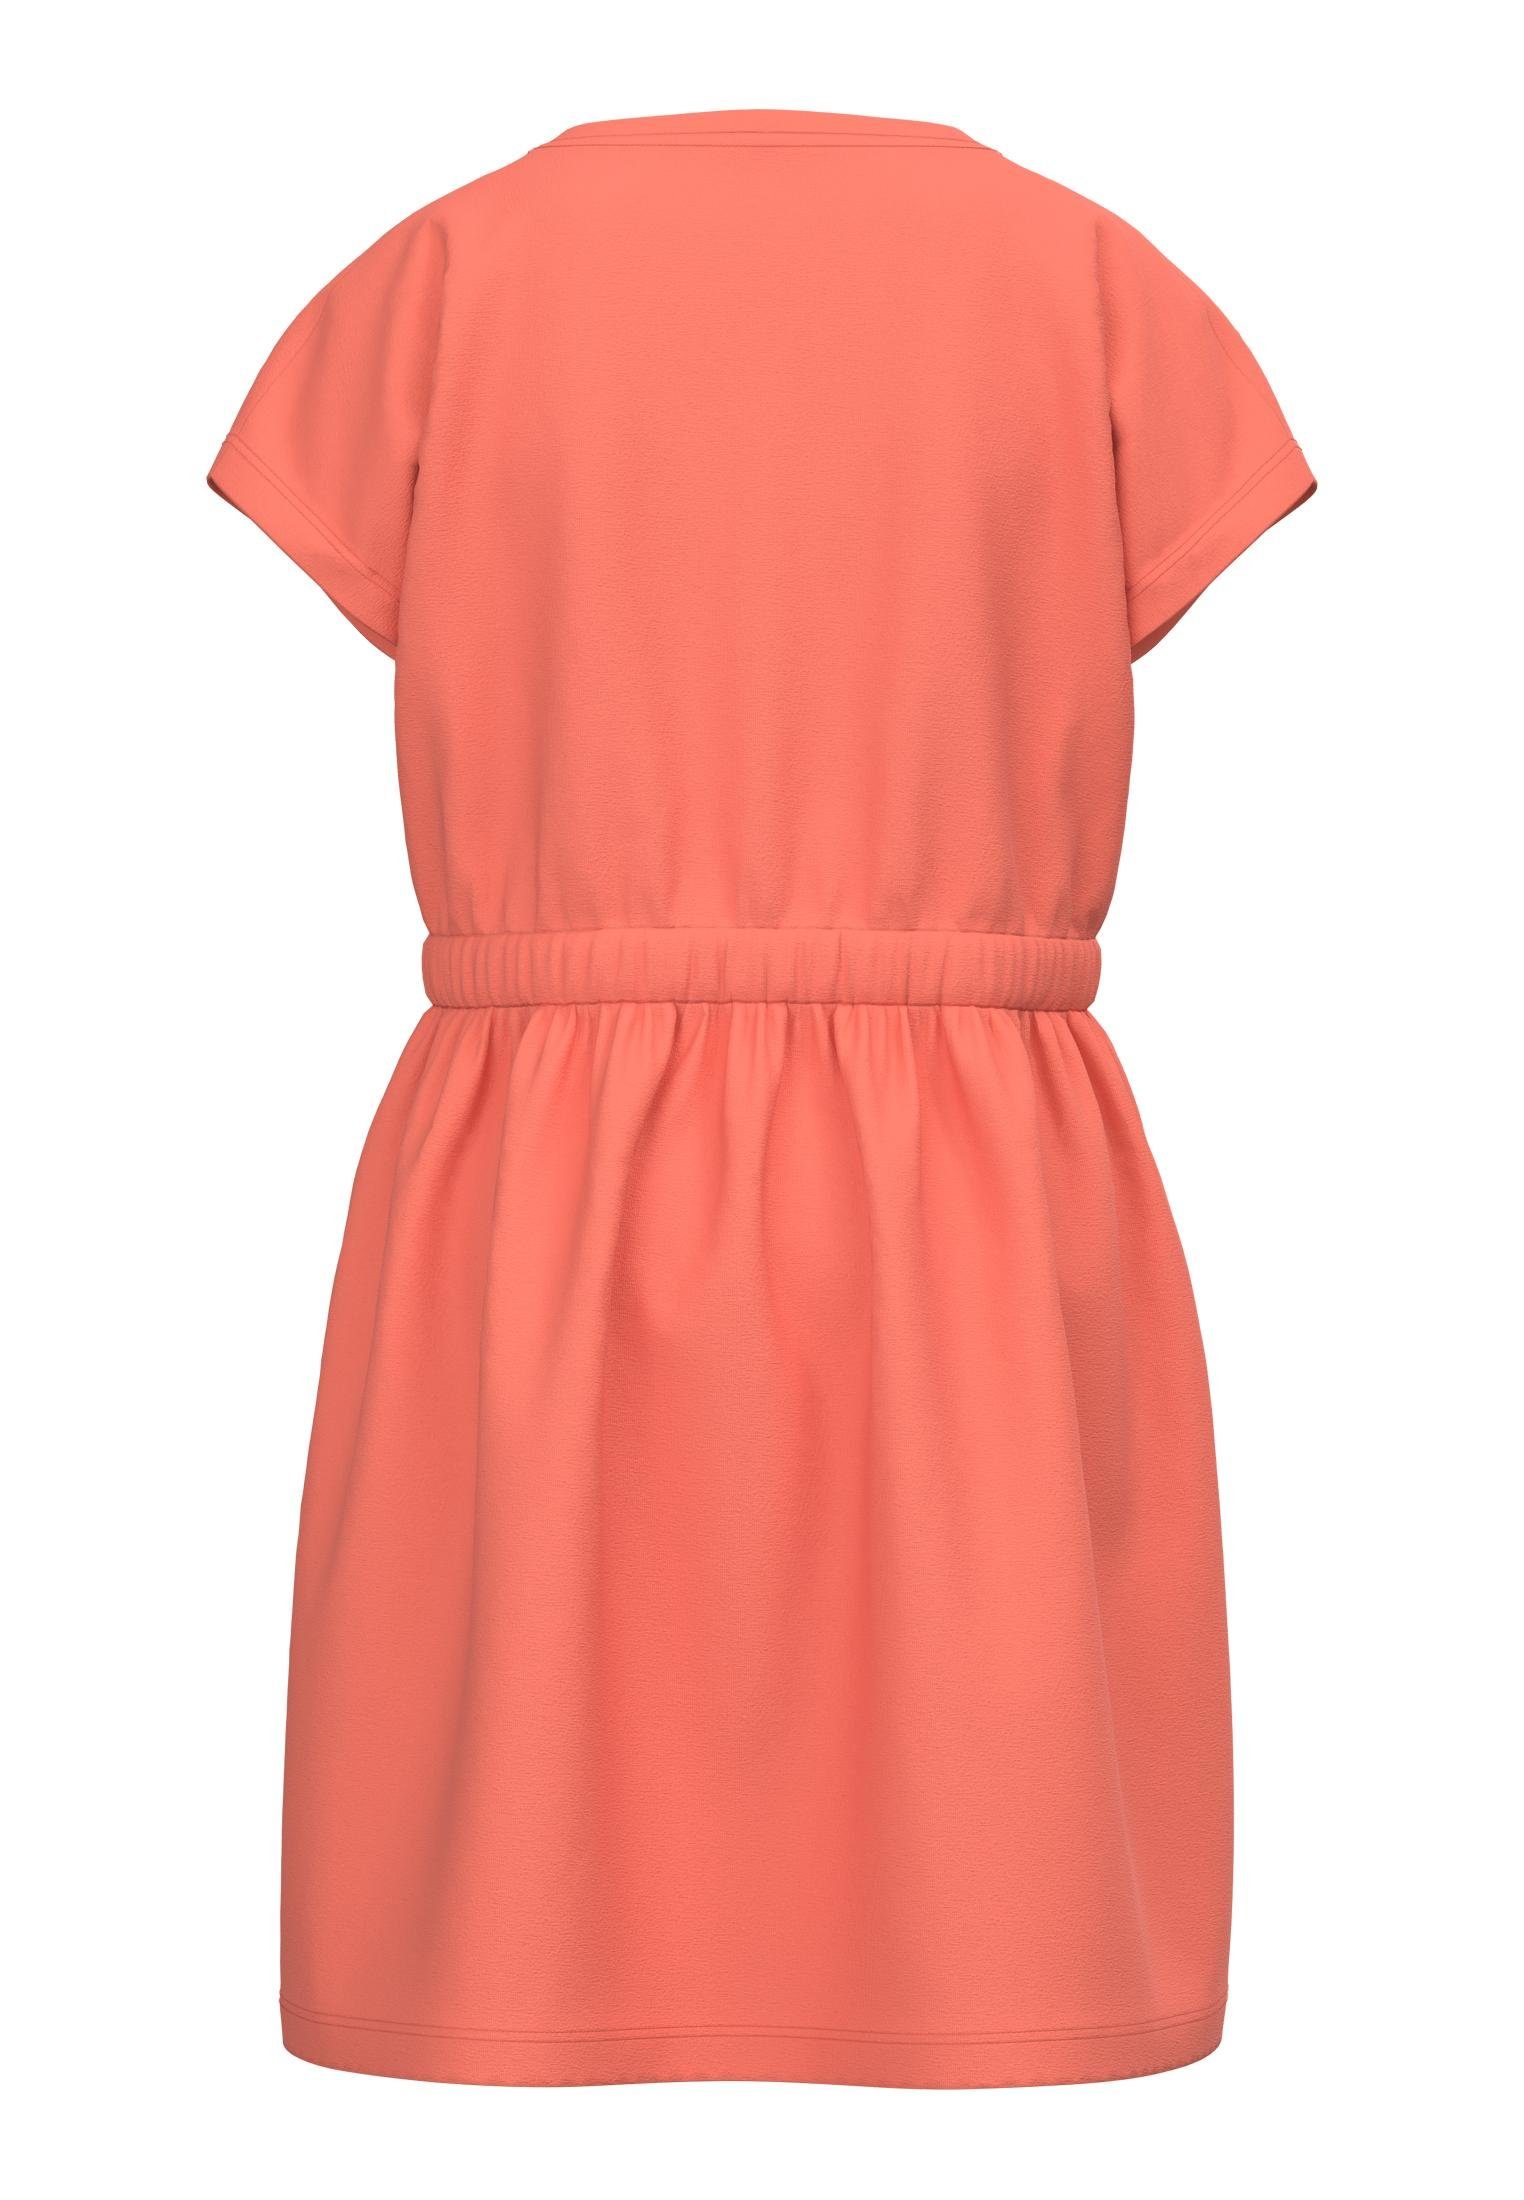 coral It Jerseykleid NKFMIEDRESS Name